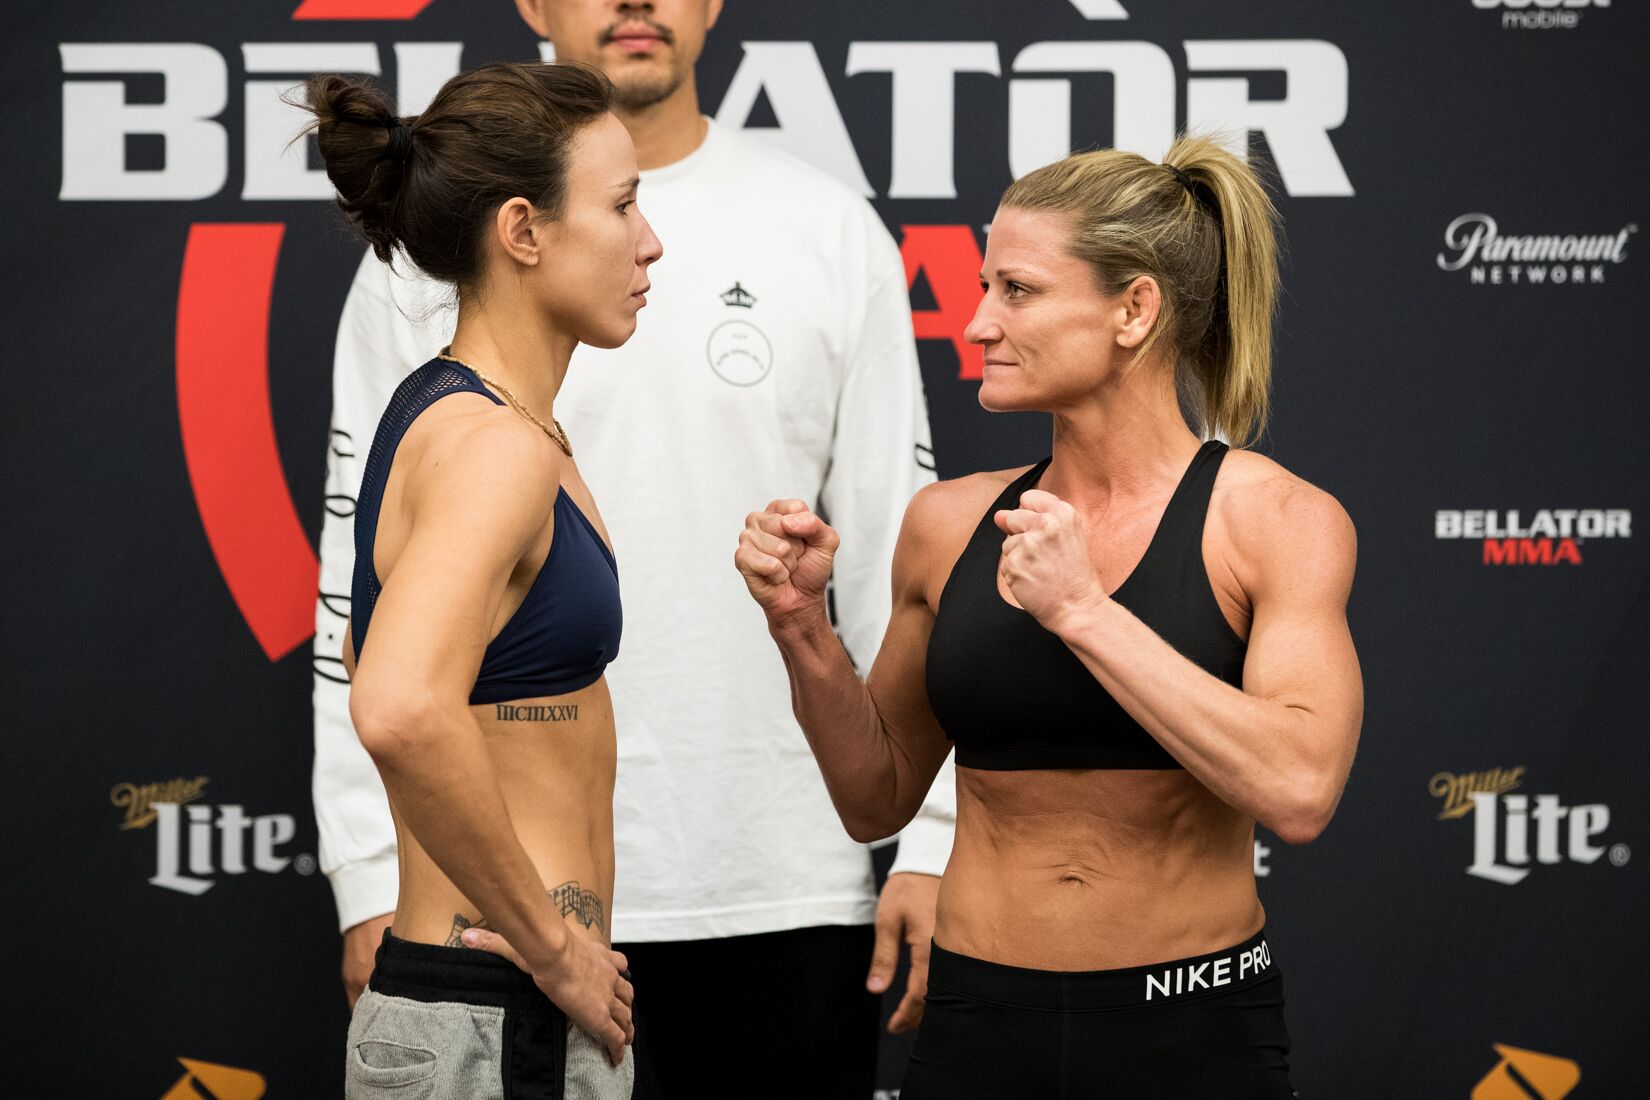 Complete Bellator 197 Weigh-In Results & Photos